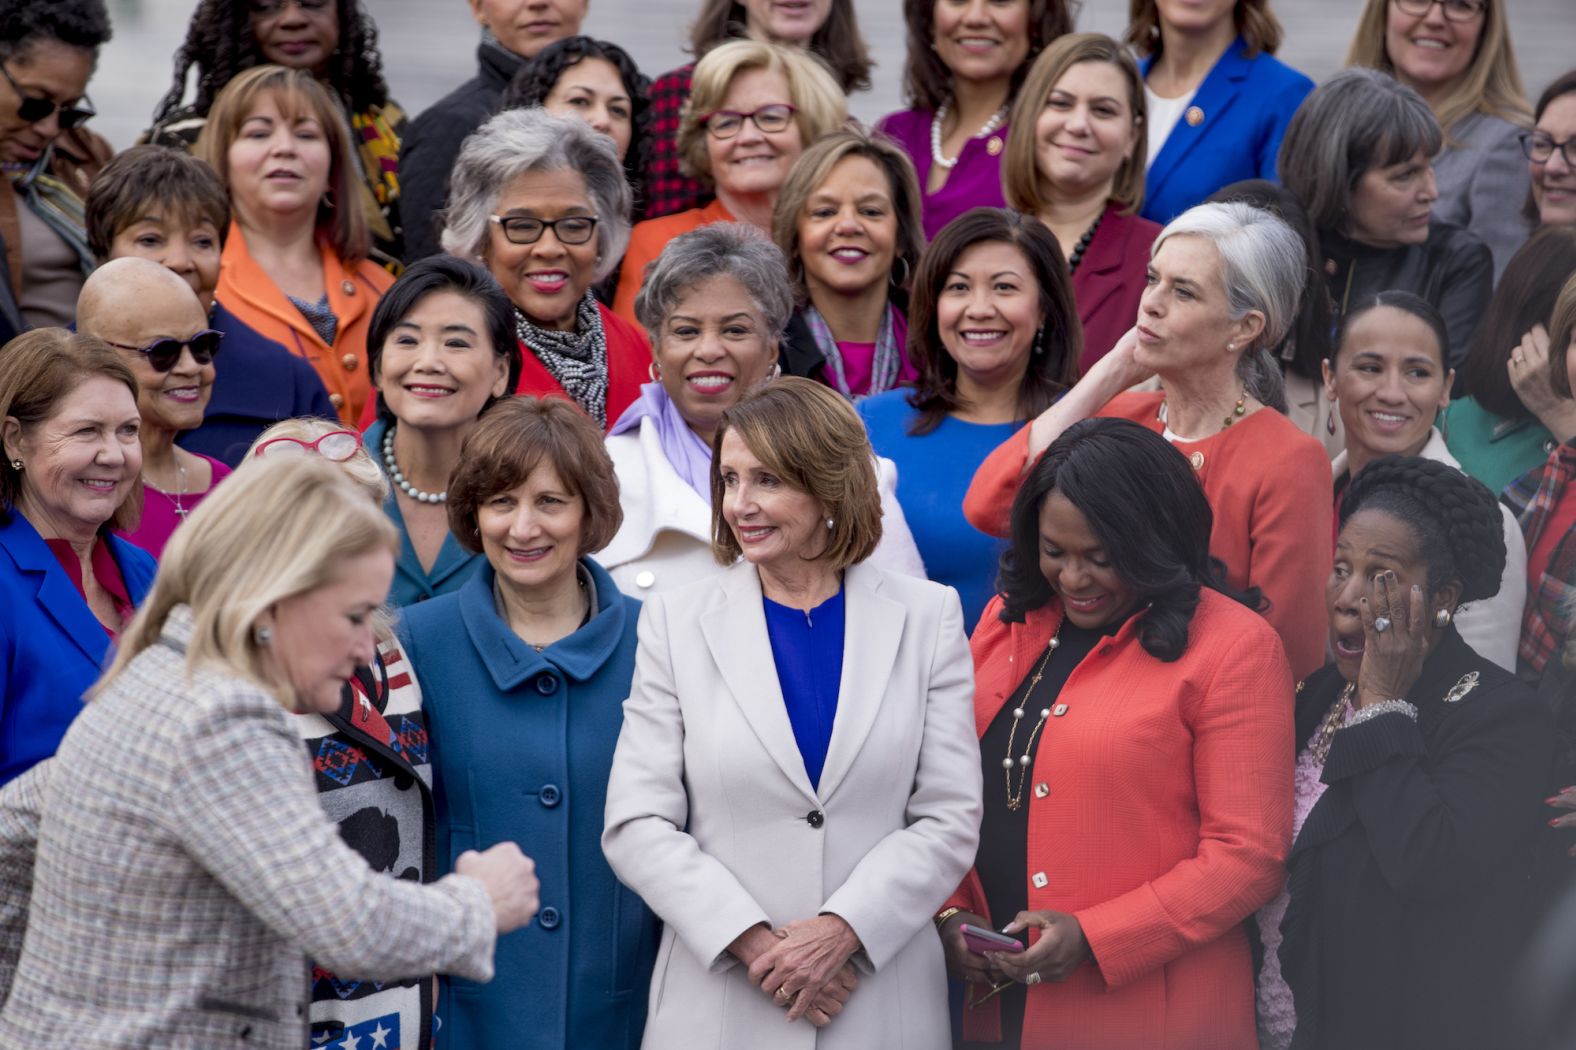 Pelosi arrives for a group photo with the House Democratic women members of the 116th Congress on the steps of the Capitol in 2019. There were <a href="index.php?page=&url=https%3A%2F%2Fwww.cnn.com%2F2019%2F01%2F03%2Fpolitics%2Fnew-congress-history-women-diversity%2F" target="_blank">record numbers of women</a> sworn in that year.